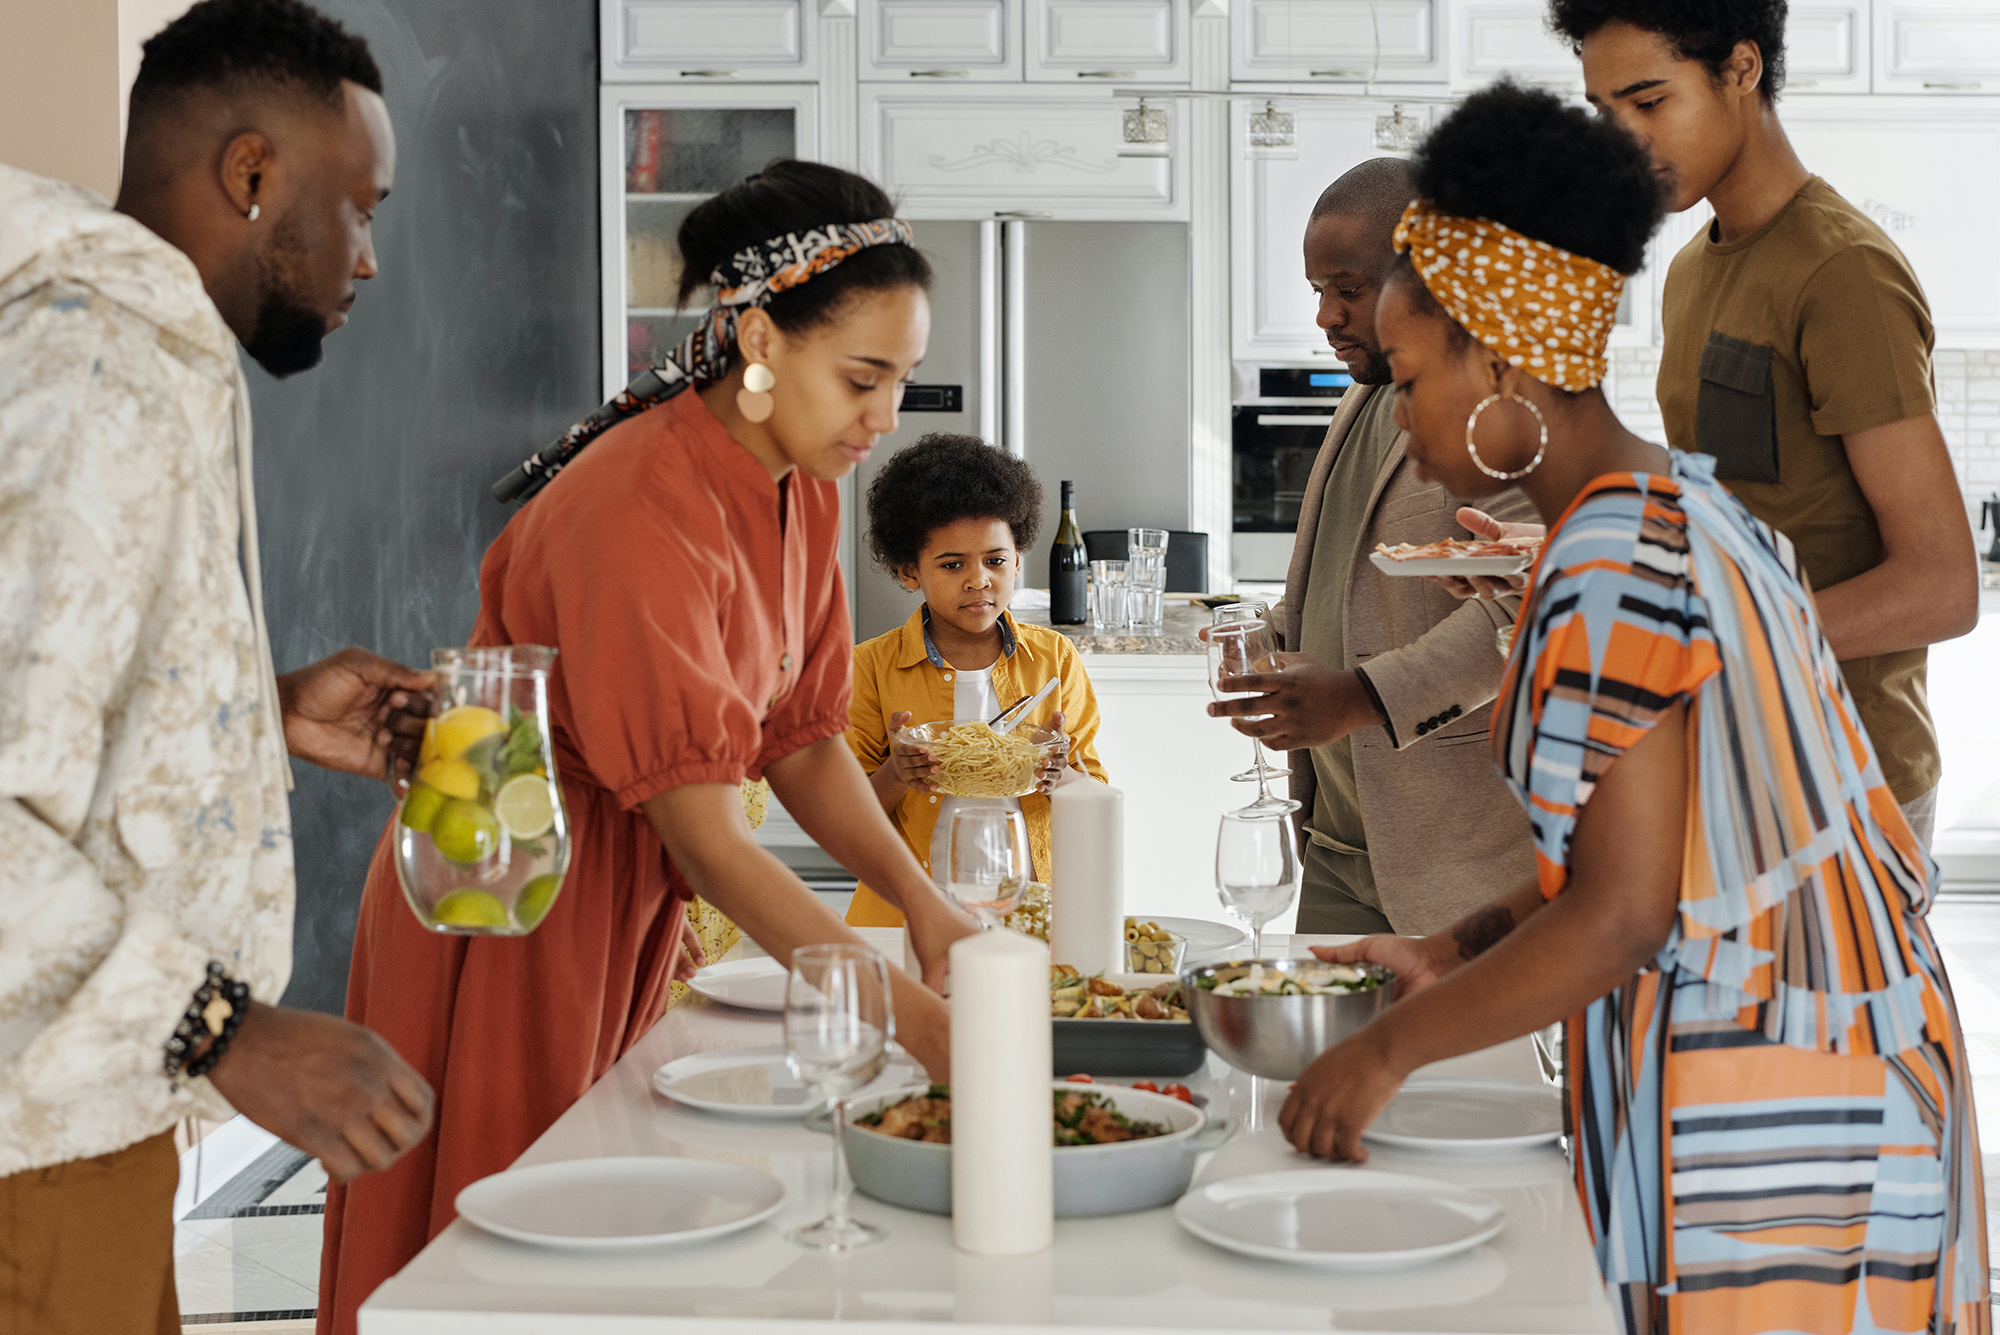 A Black family made up of two men, two women, a young adult, and a child set the table for a meal.